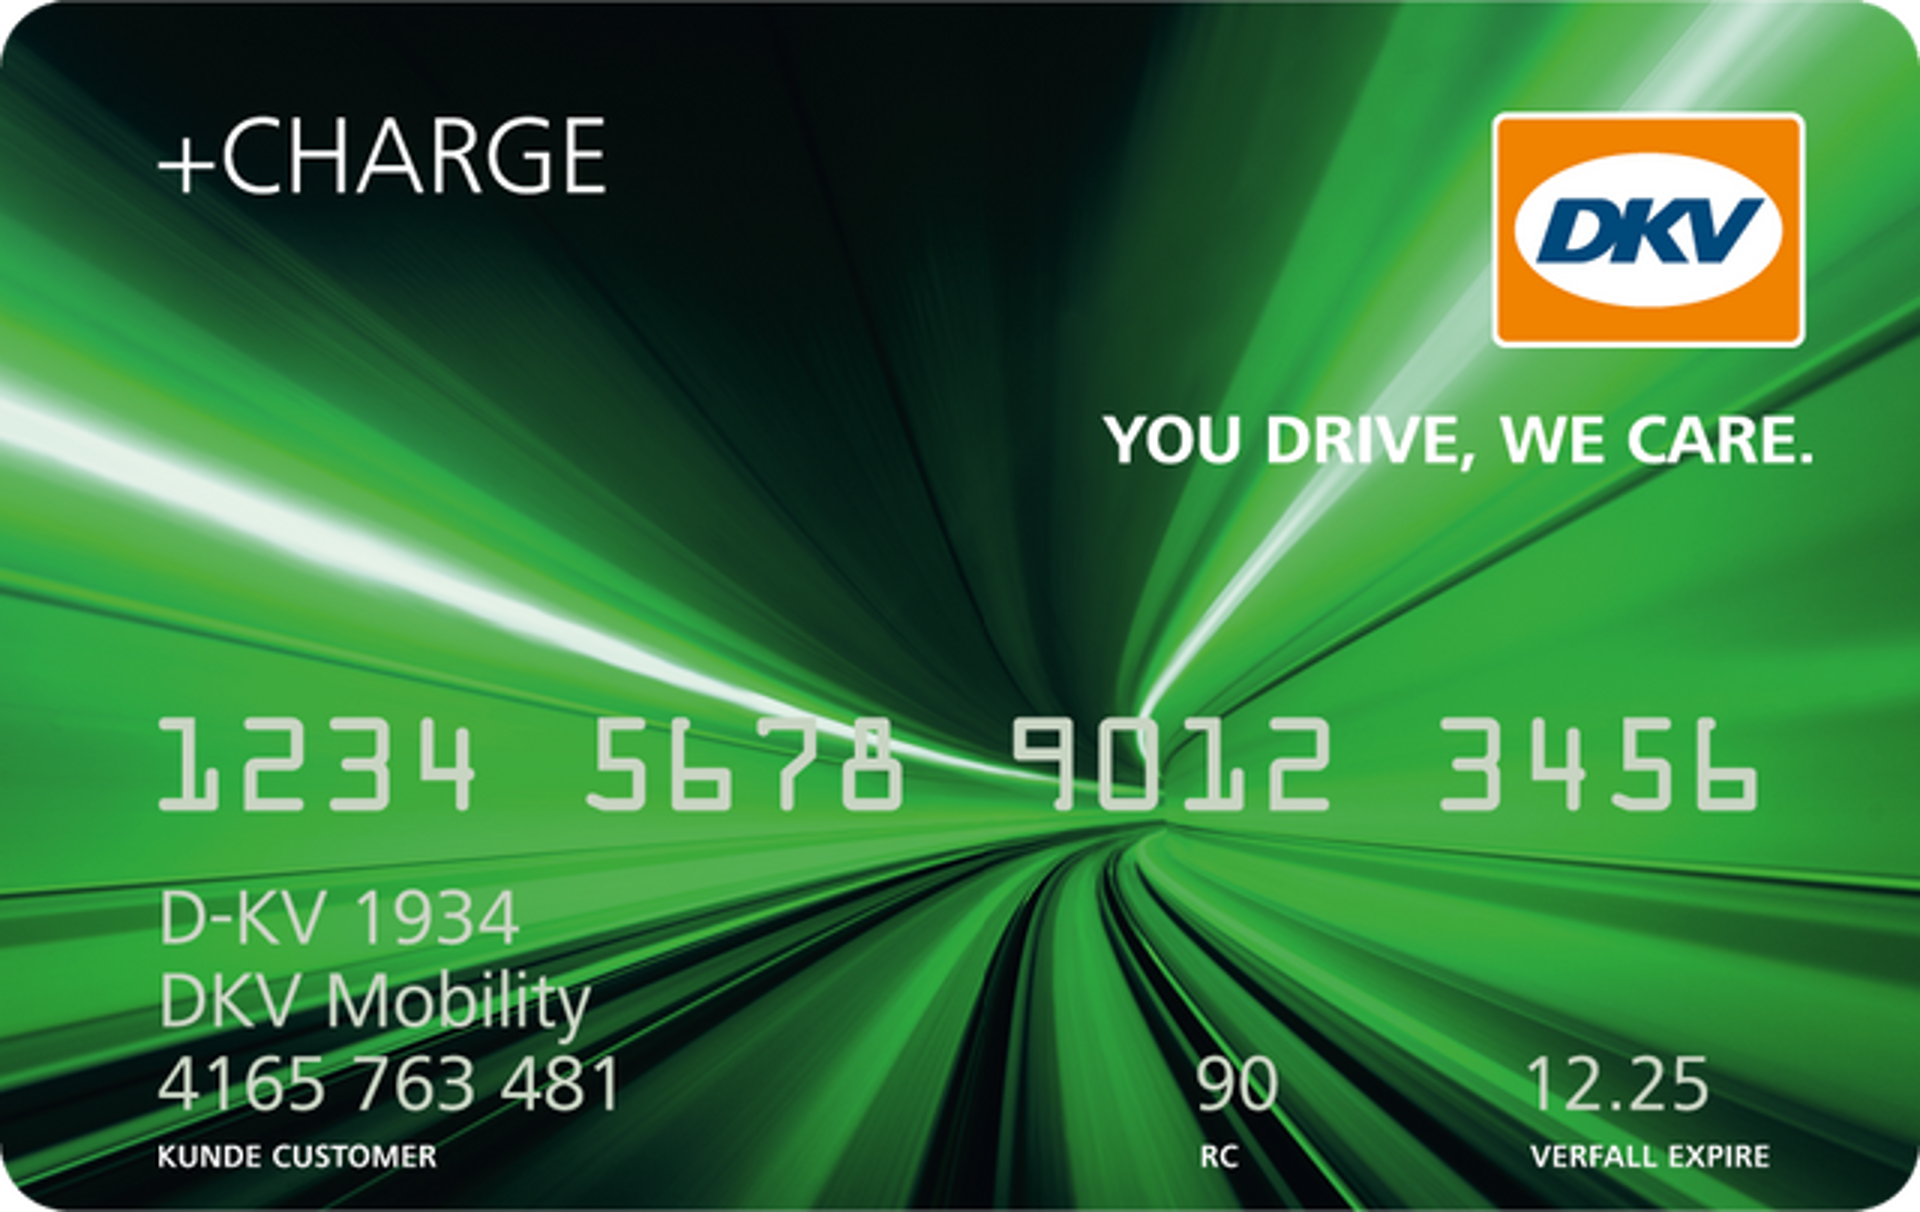 DKV Card +Charge